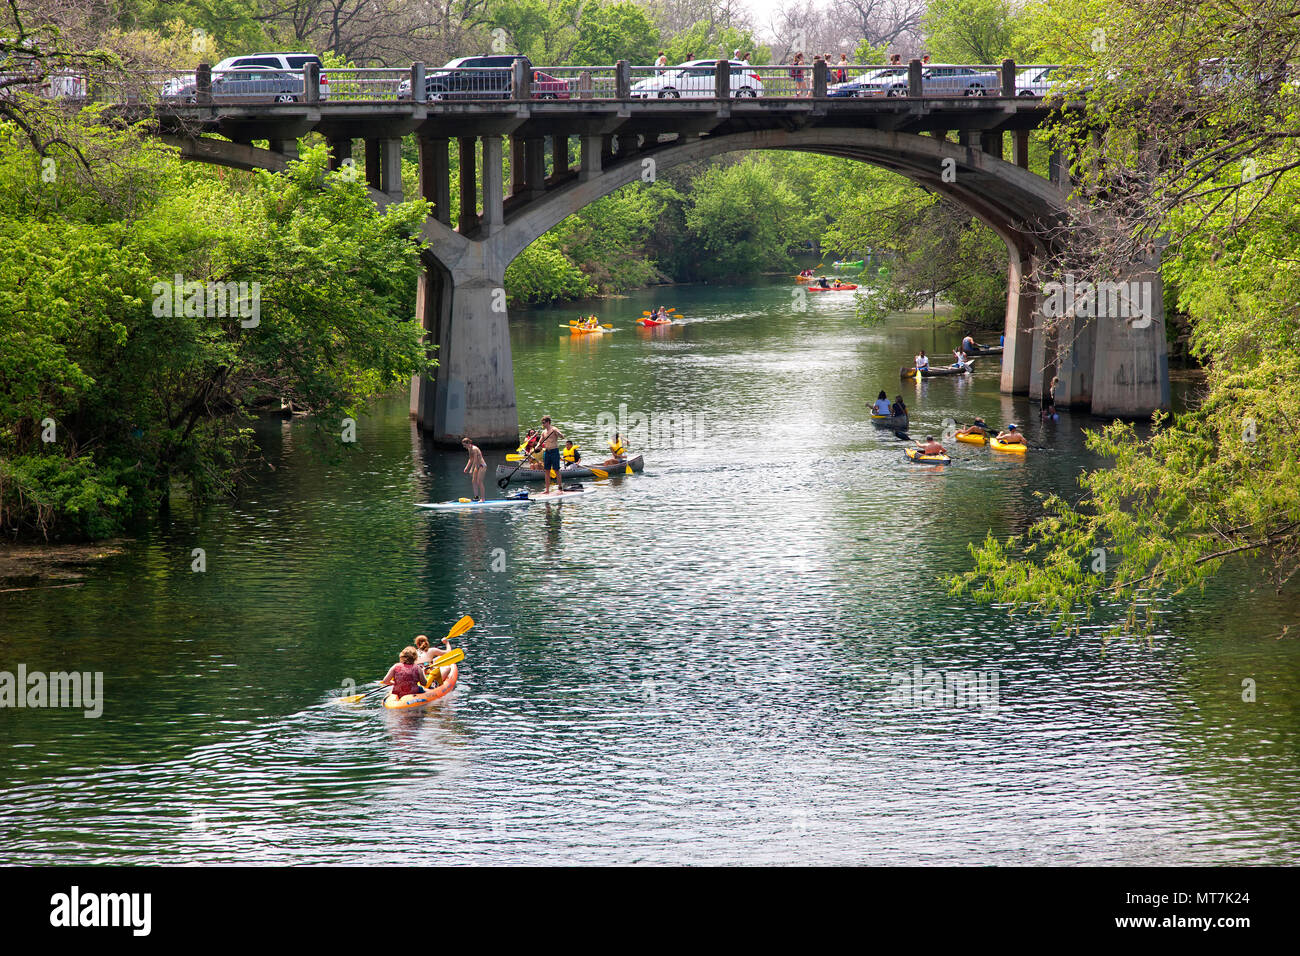 Young people using paddle boards, colorful canooes & kayacs, bridge crossing Barton Creek,  Colorado River, Zilker Park. Stock Photo